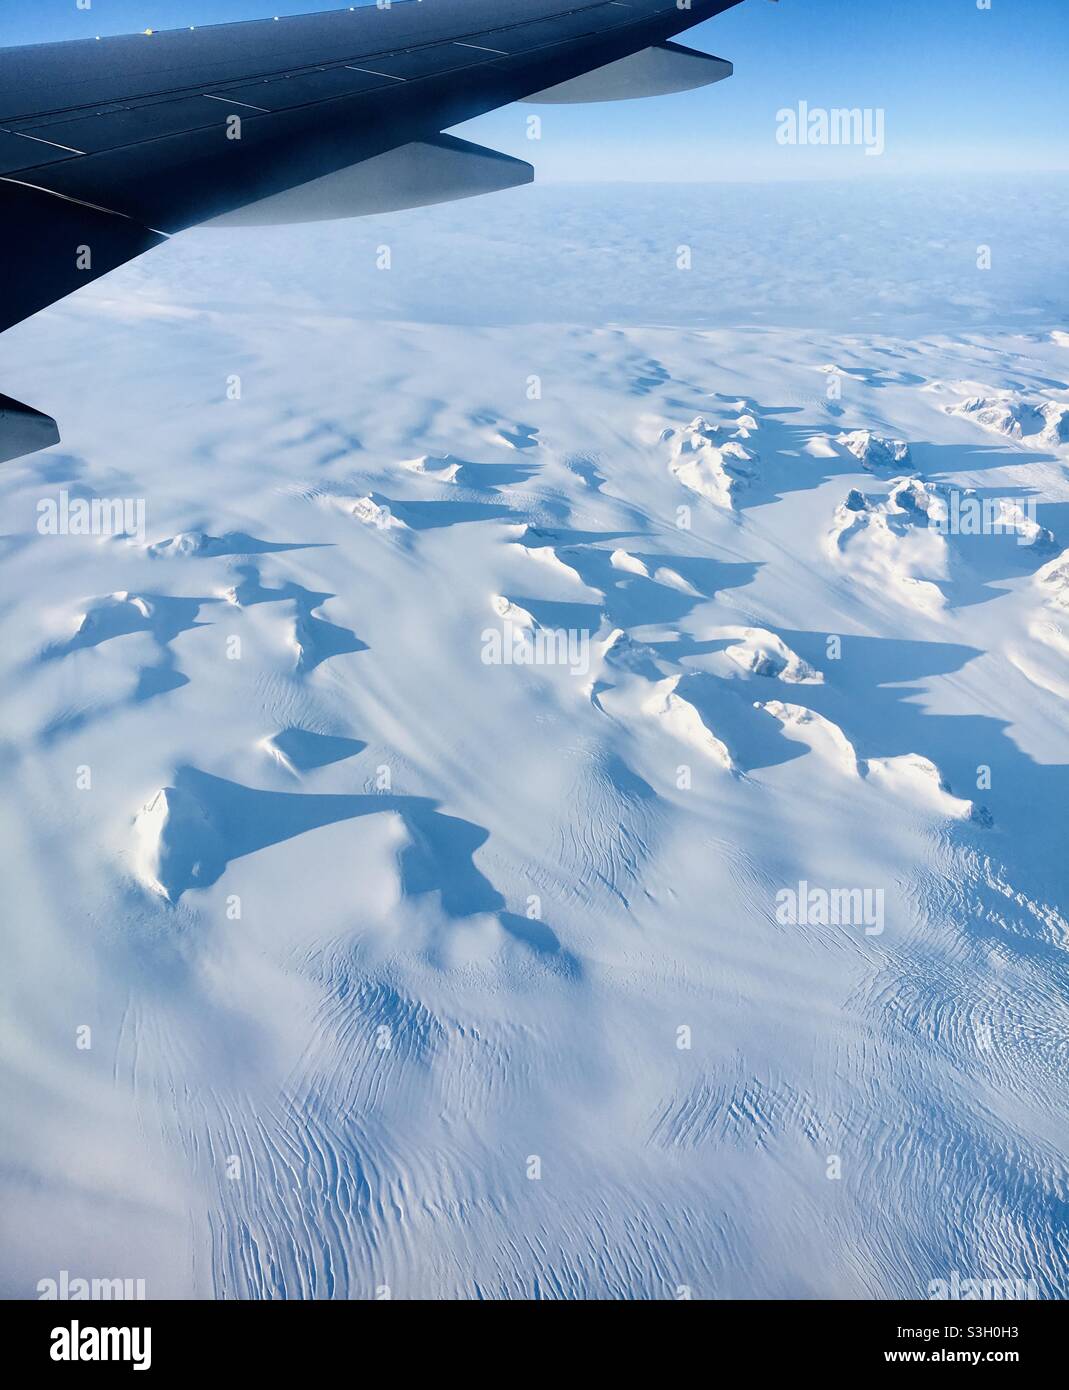 Greenland icecap view from an airplane Stock Photo